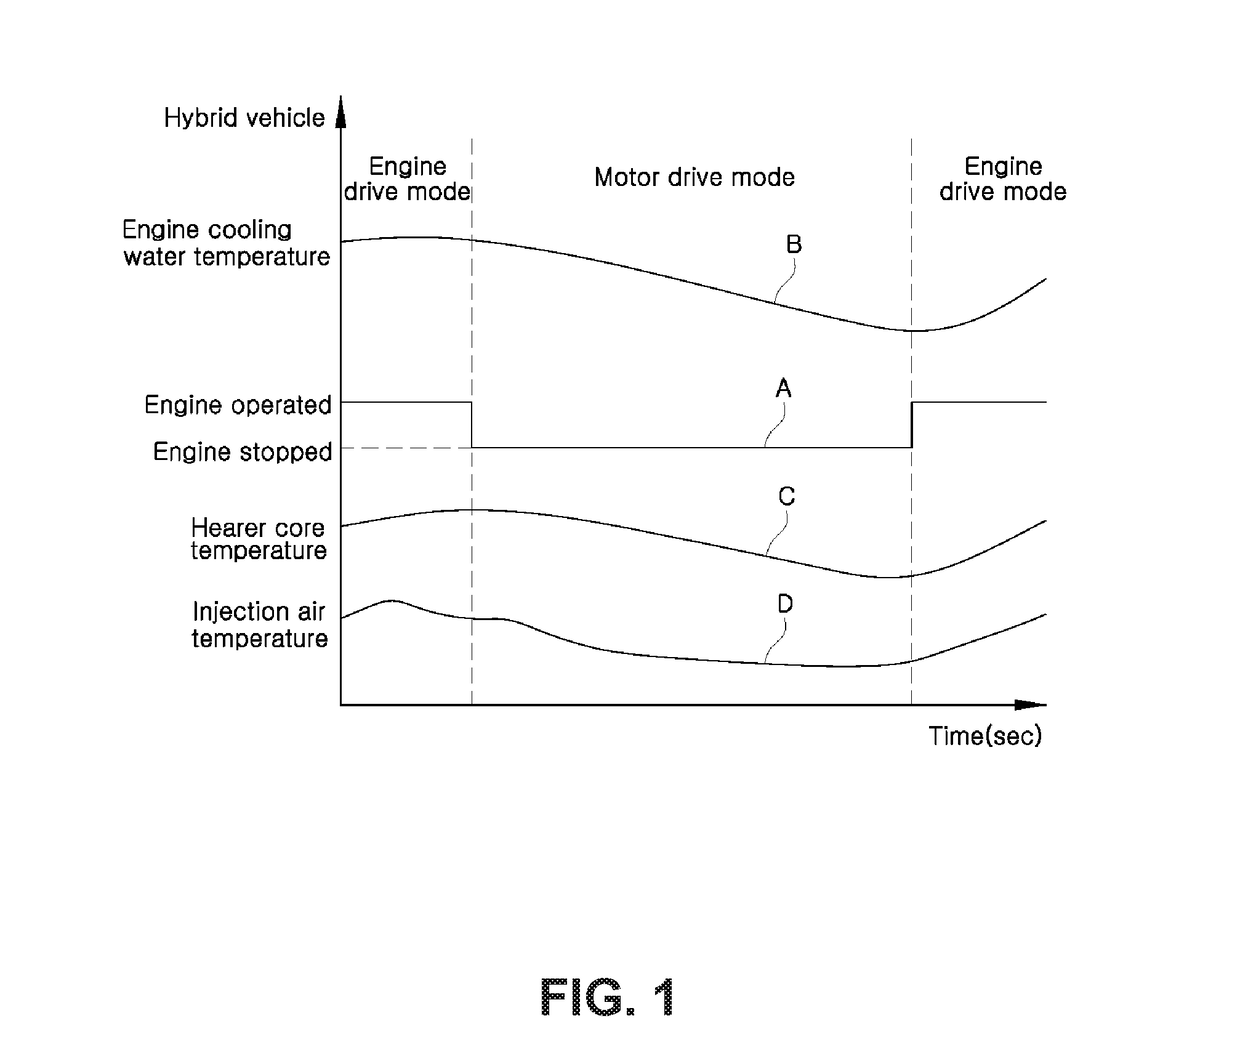 Air conditioning system for hybrid vehicles